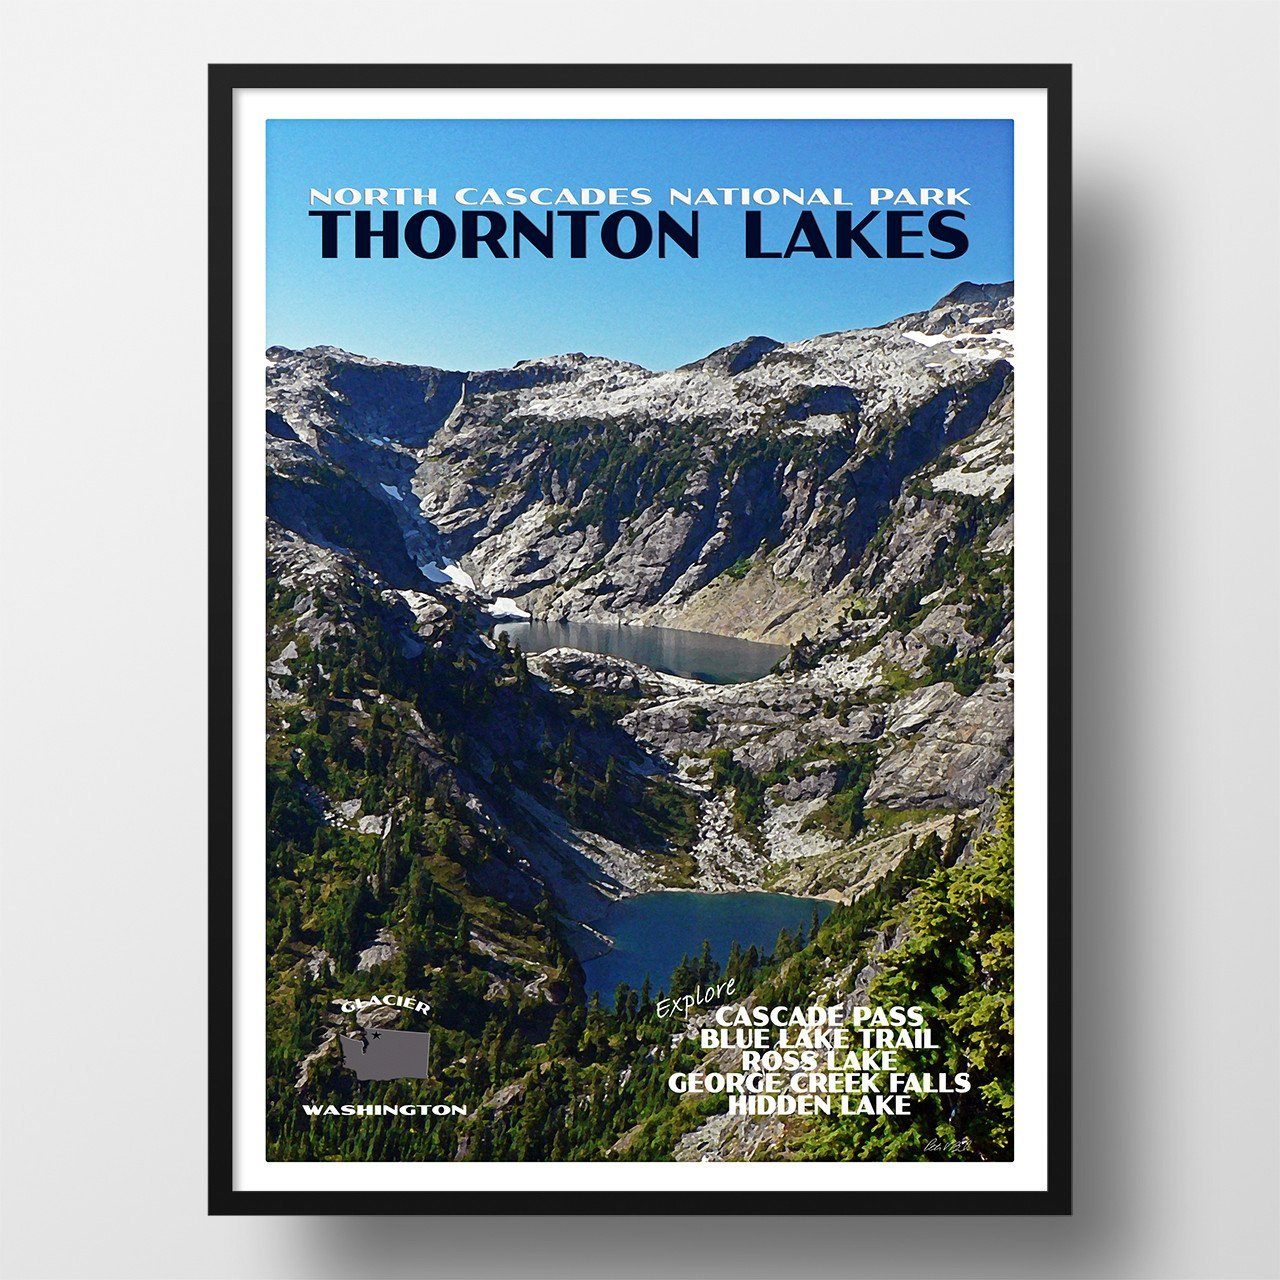 North Cascades National Park Poster-Thornton Lakes